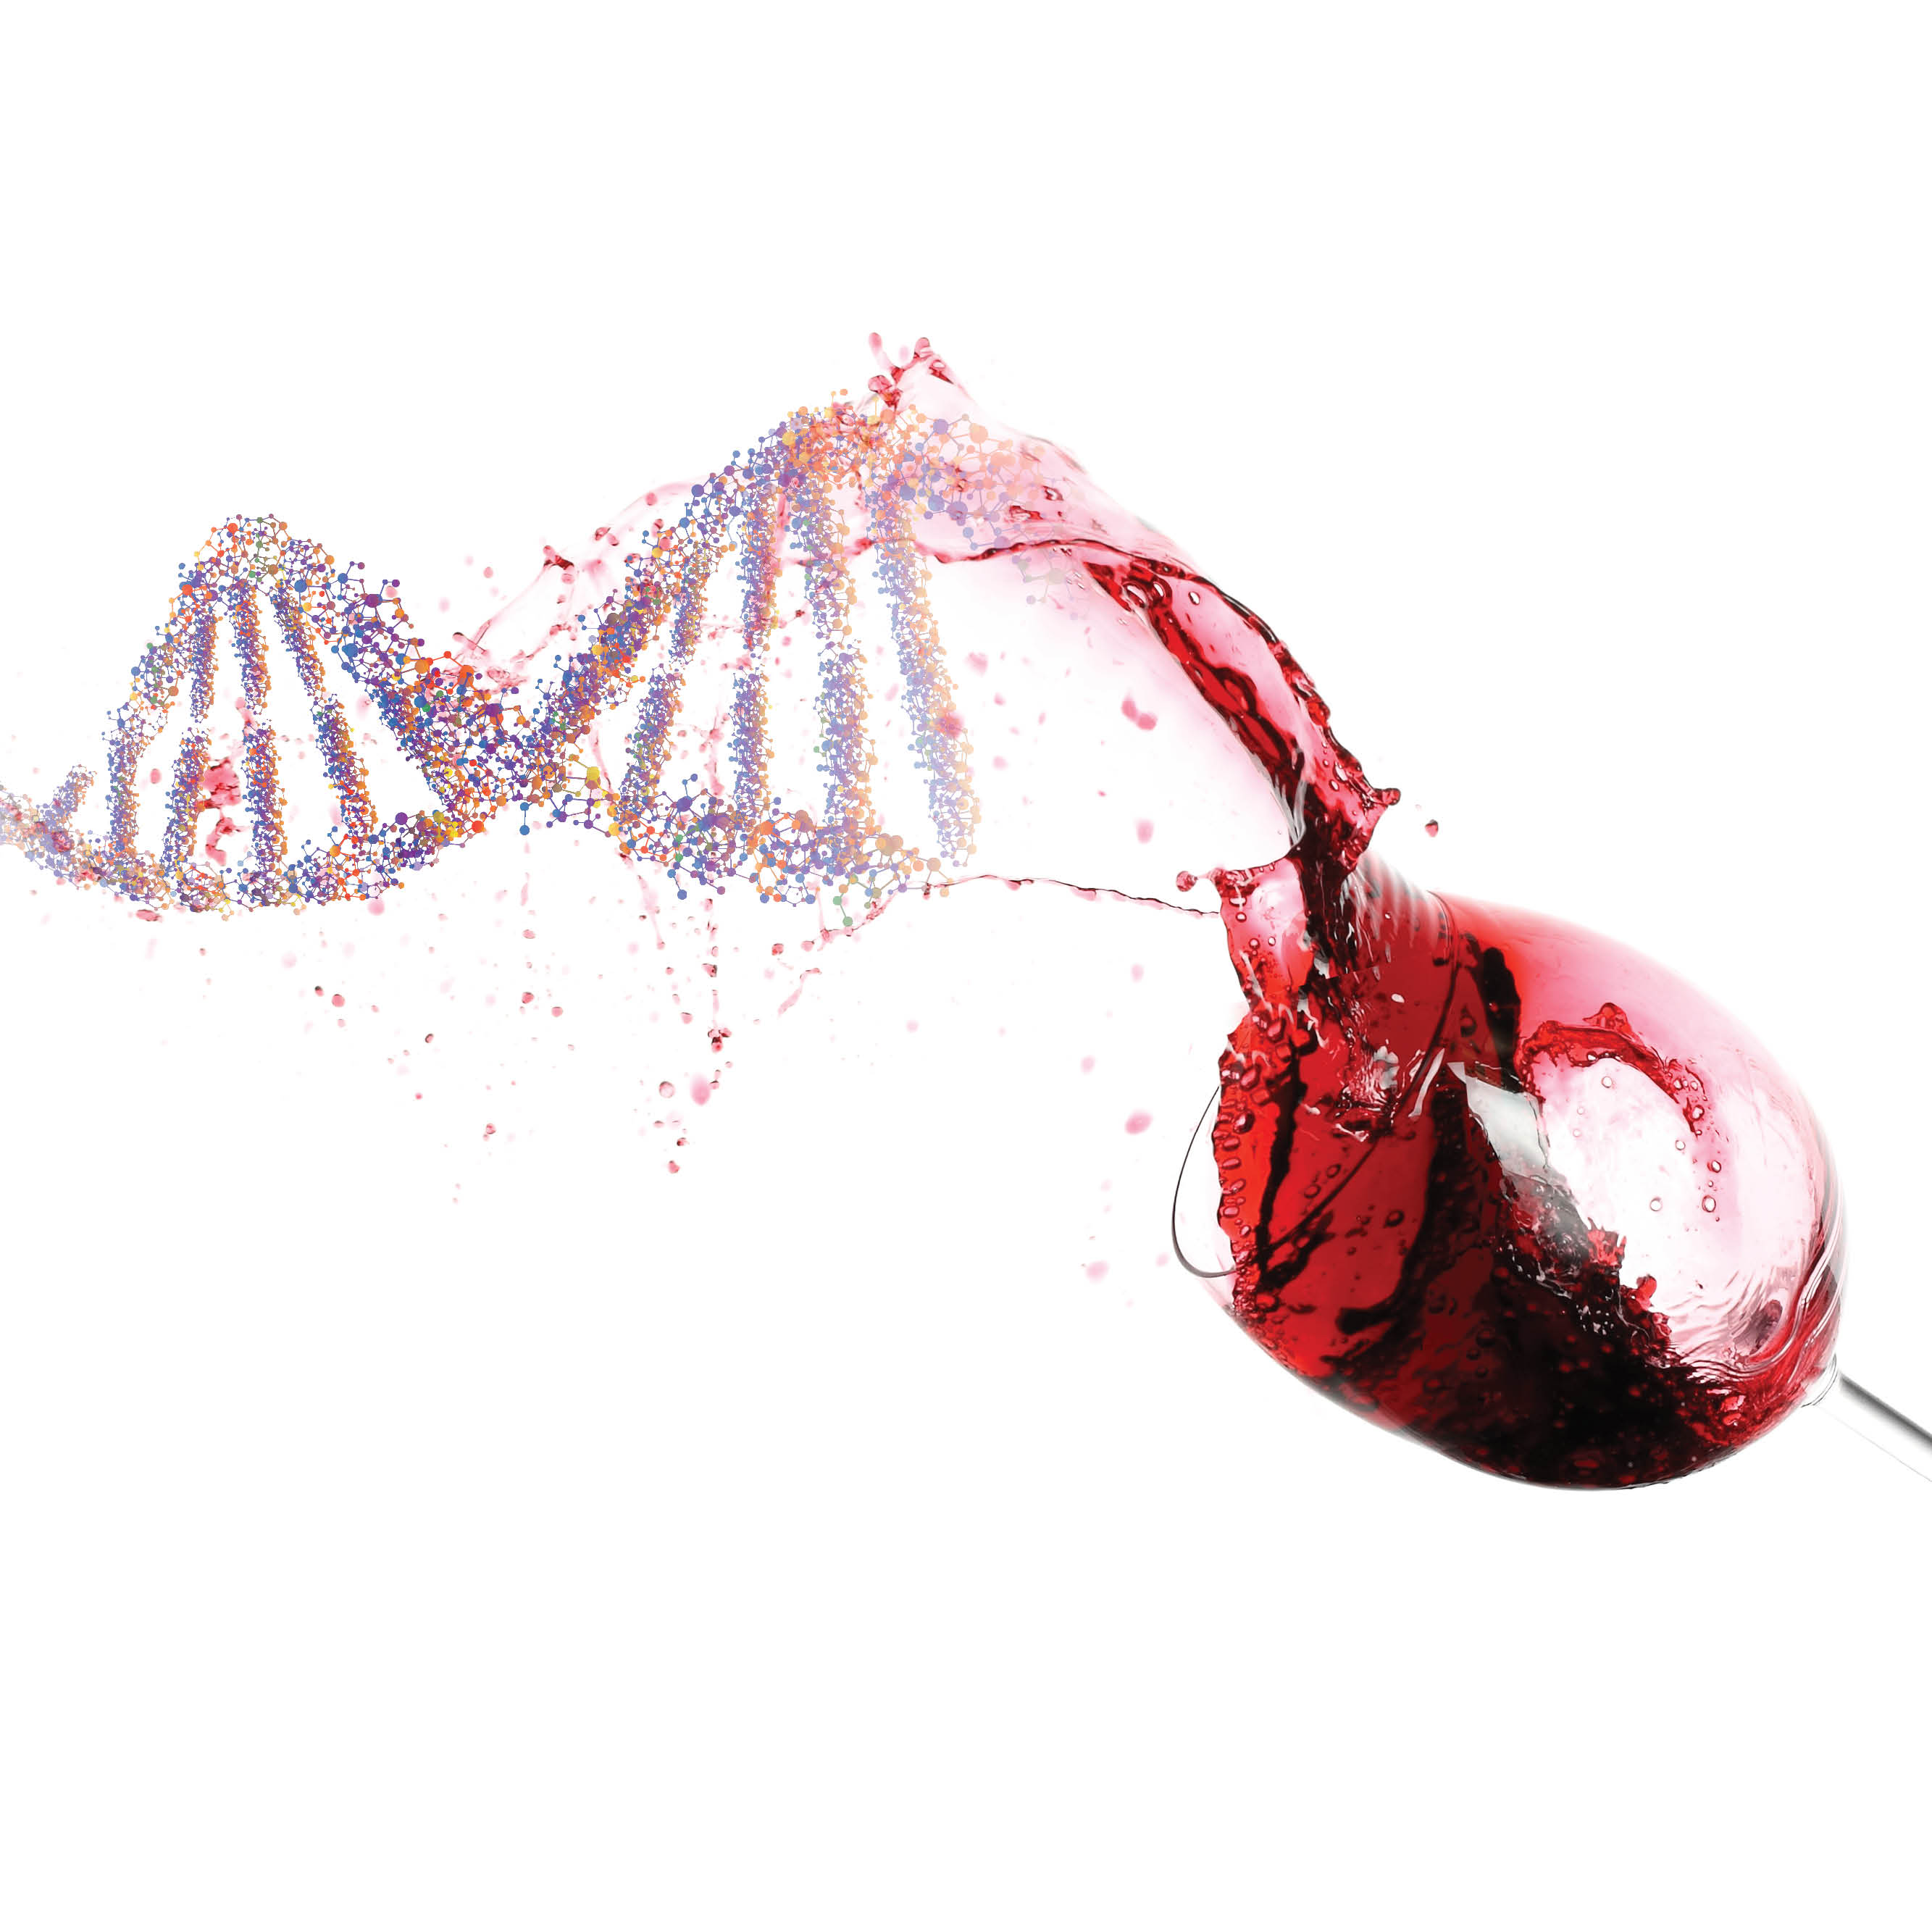 An image shows a glass of wine and a strand of DNA.